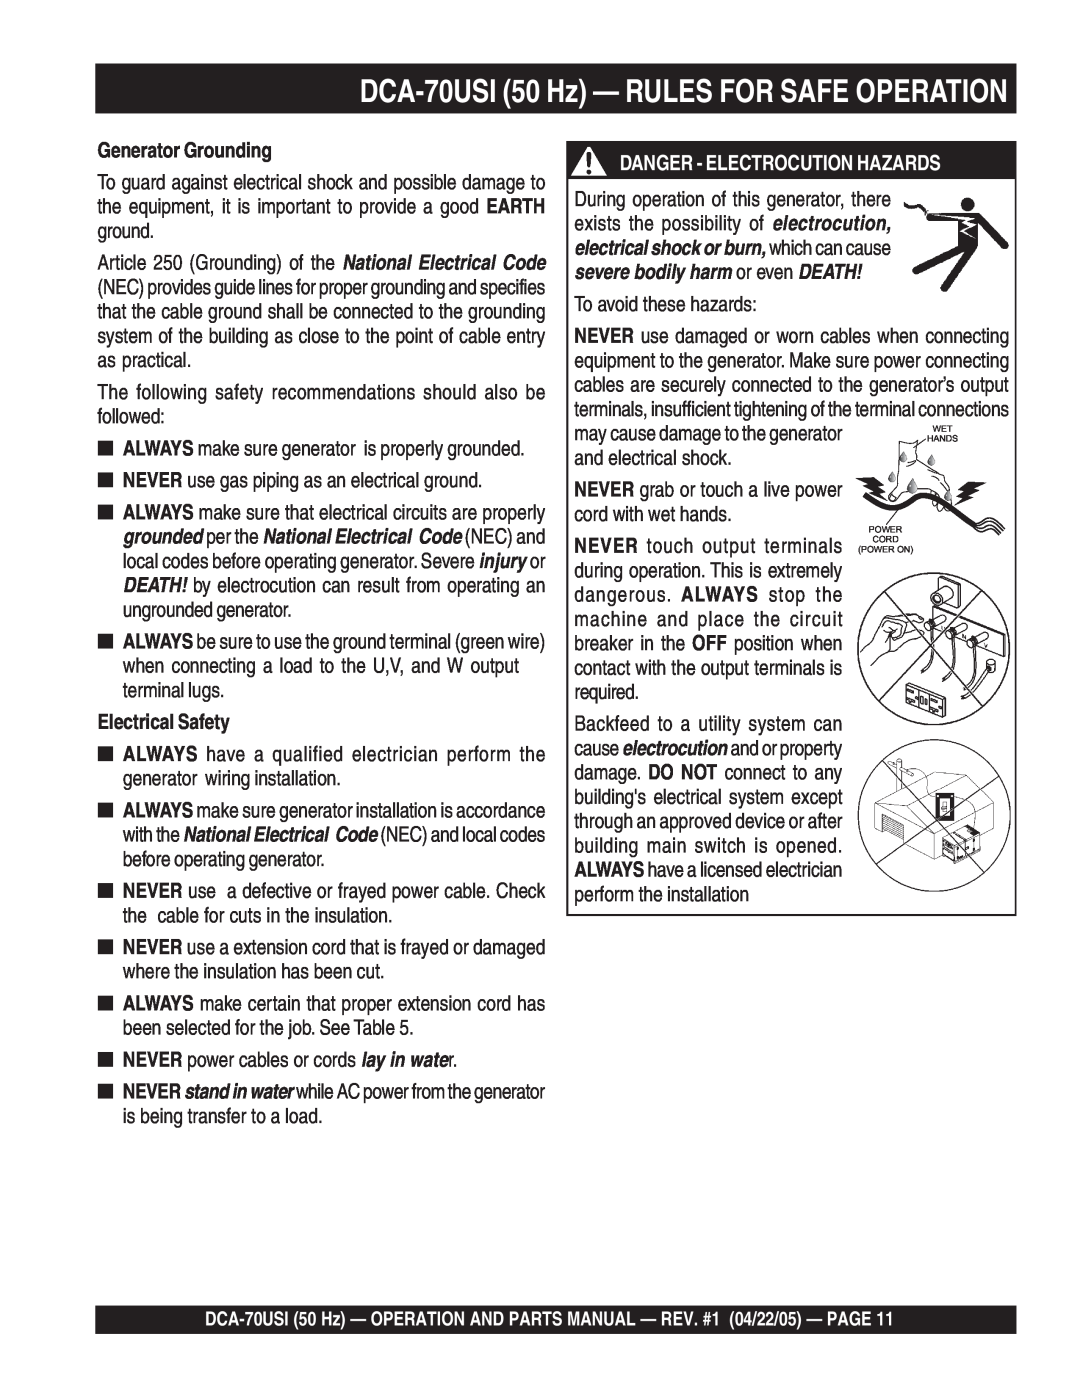 Multiquip operation manual DCA-70USI50 Hz — RULES FOR SAFE OPERATION, Generator Grounding, Electrical Safety 